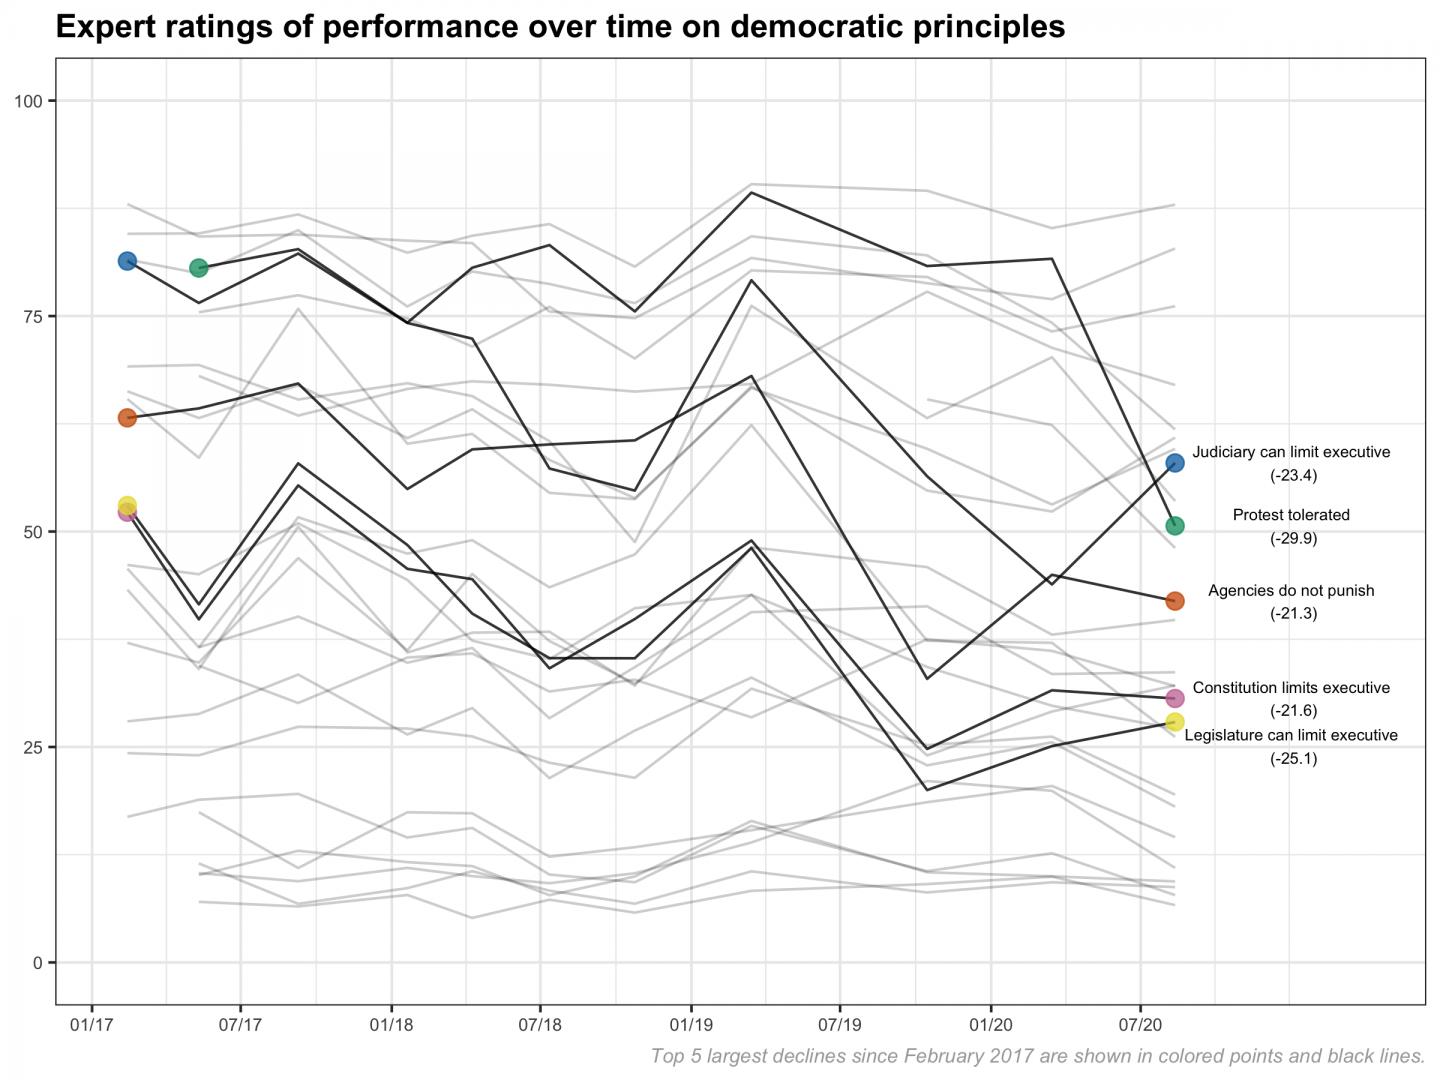 Expert ratings of US performance on democratic principles